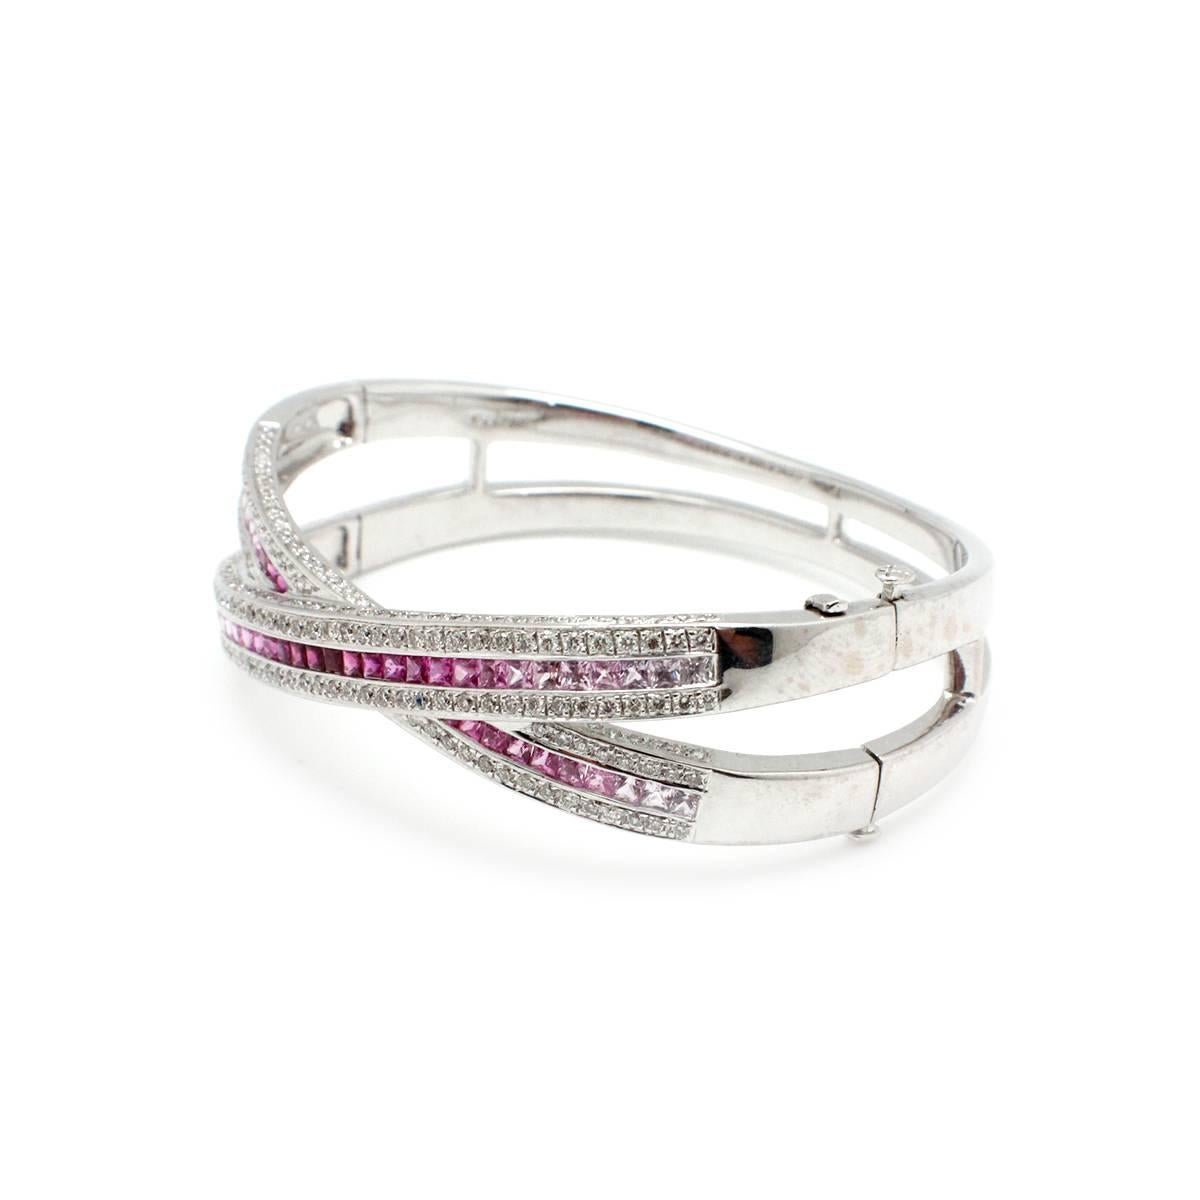 This unique bangle bracelet is crafted in 18k white gold. Precious pink sapphires and are given luxurious direction with this crossover bangle bracelet design. 18k white gold steers the diamonds and pink sapphires, creating a captivating rhythm for